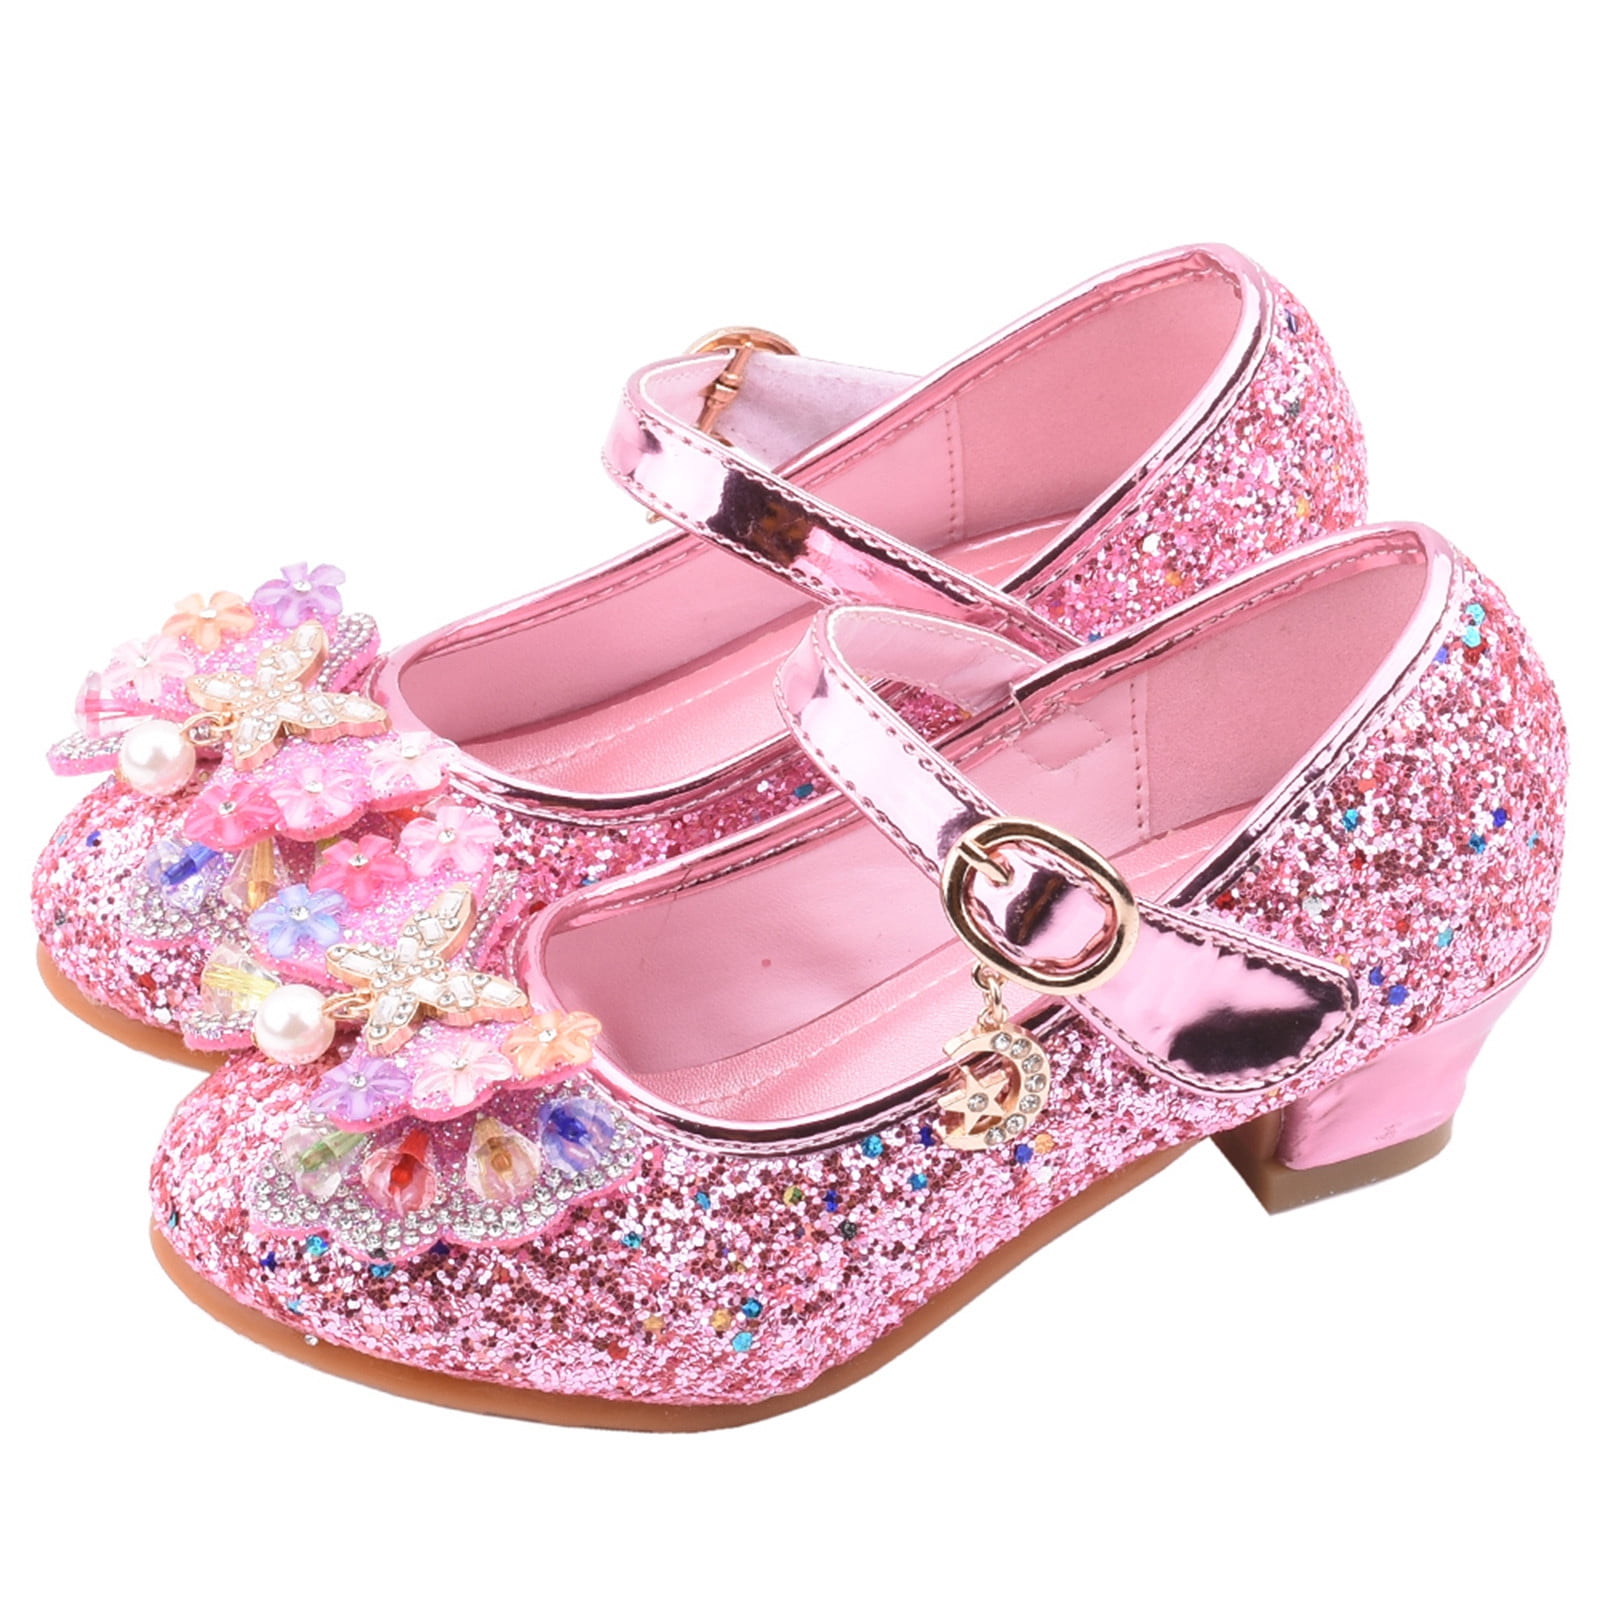 Children Infant Kids Baby Girl Bowknot Bling Sequins Single Princess Party Shoes 